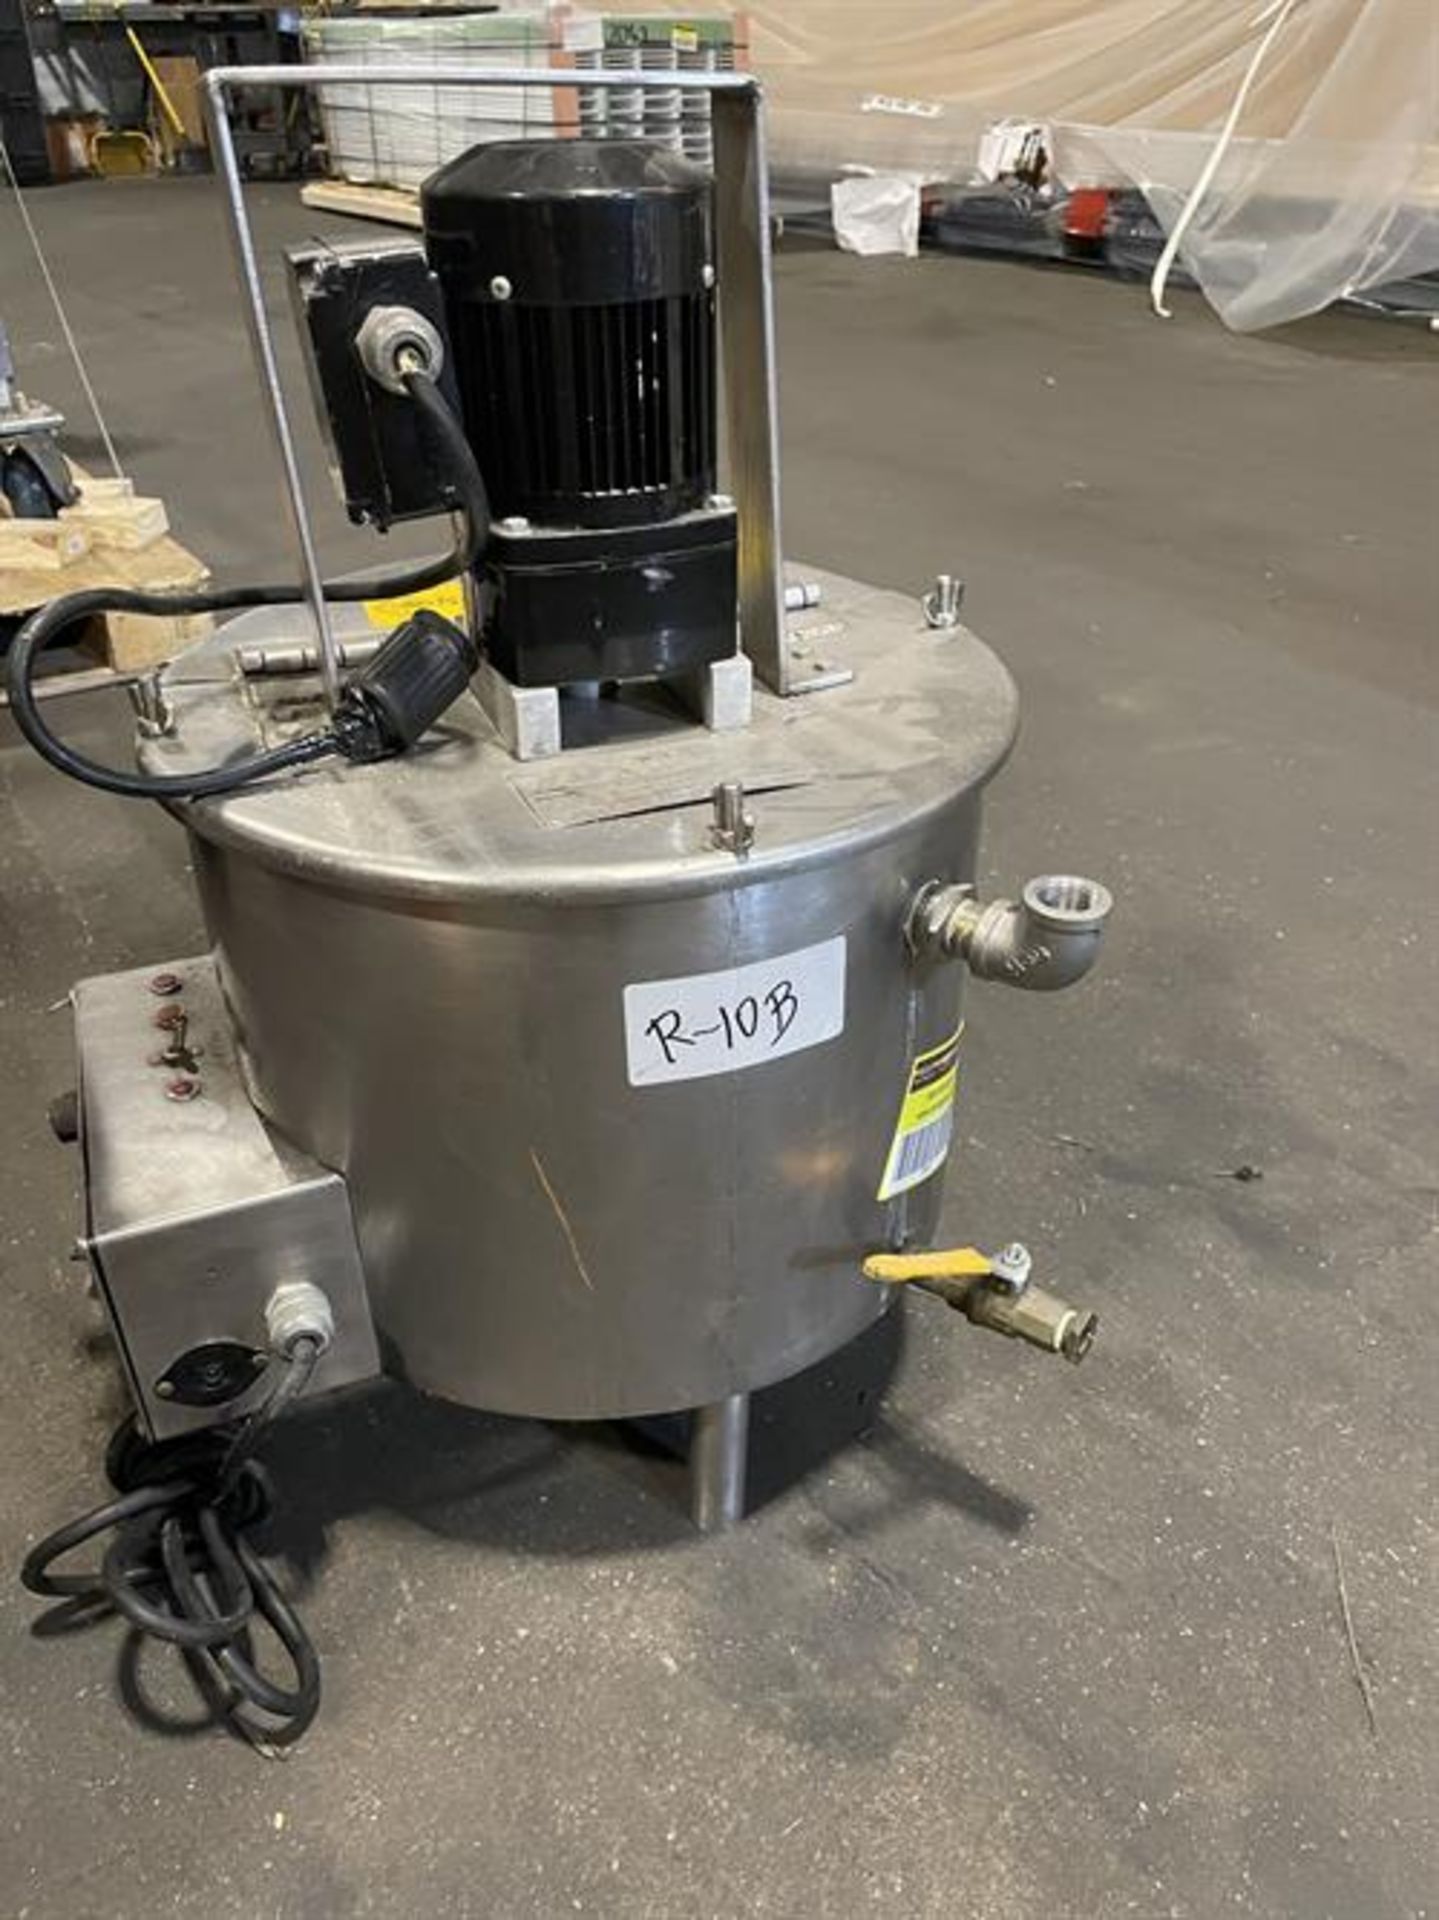 Savage 50-lb SS Chocolate Melter - Model 50 C.M.T. - Serial number 138 - Jacketed and agitated - Image 6 of 7